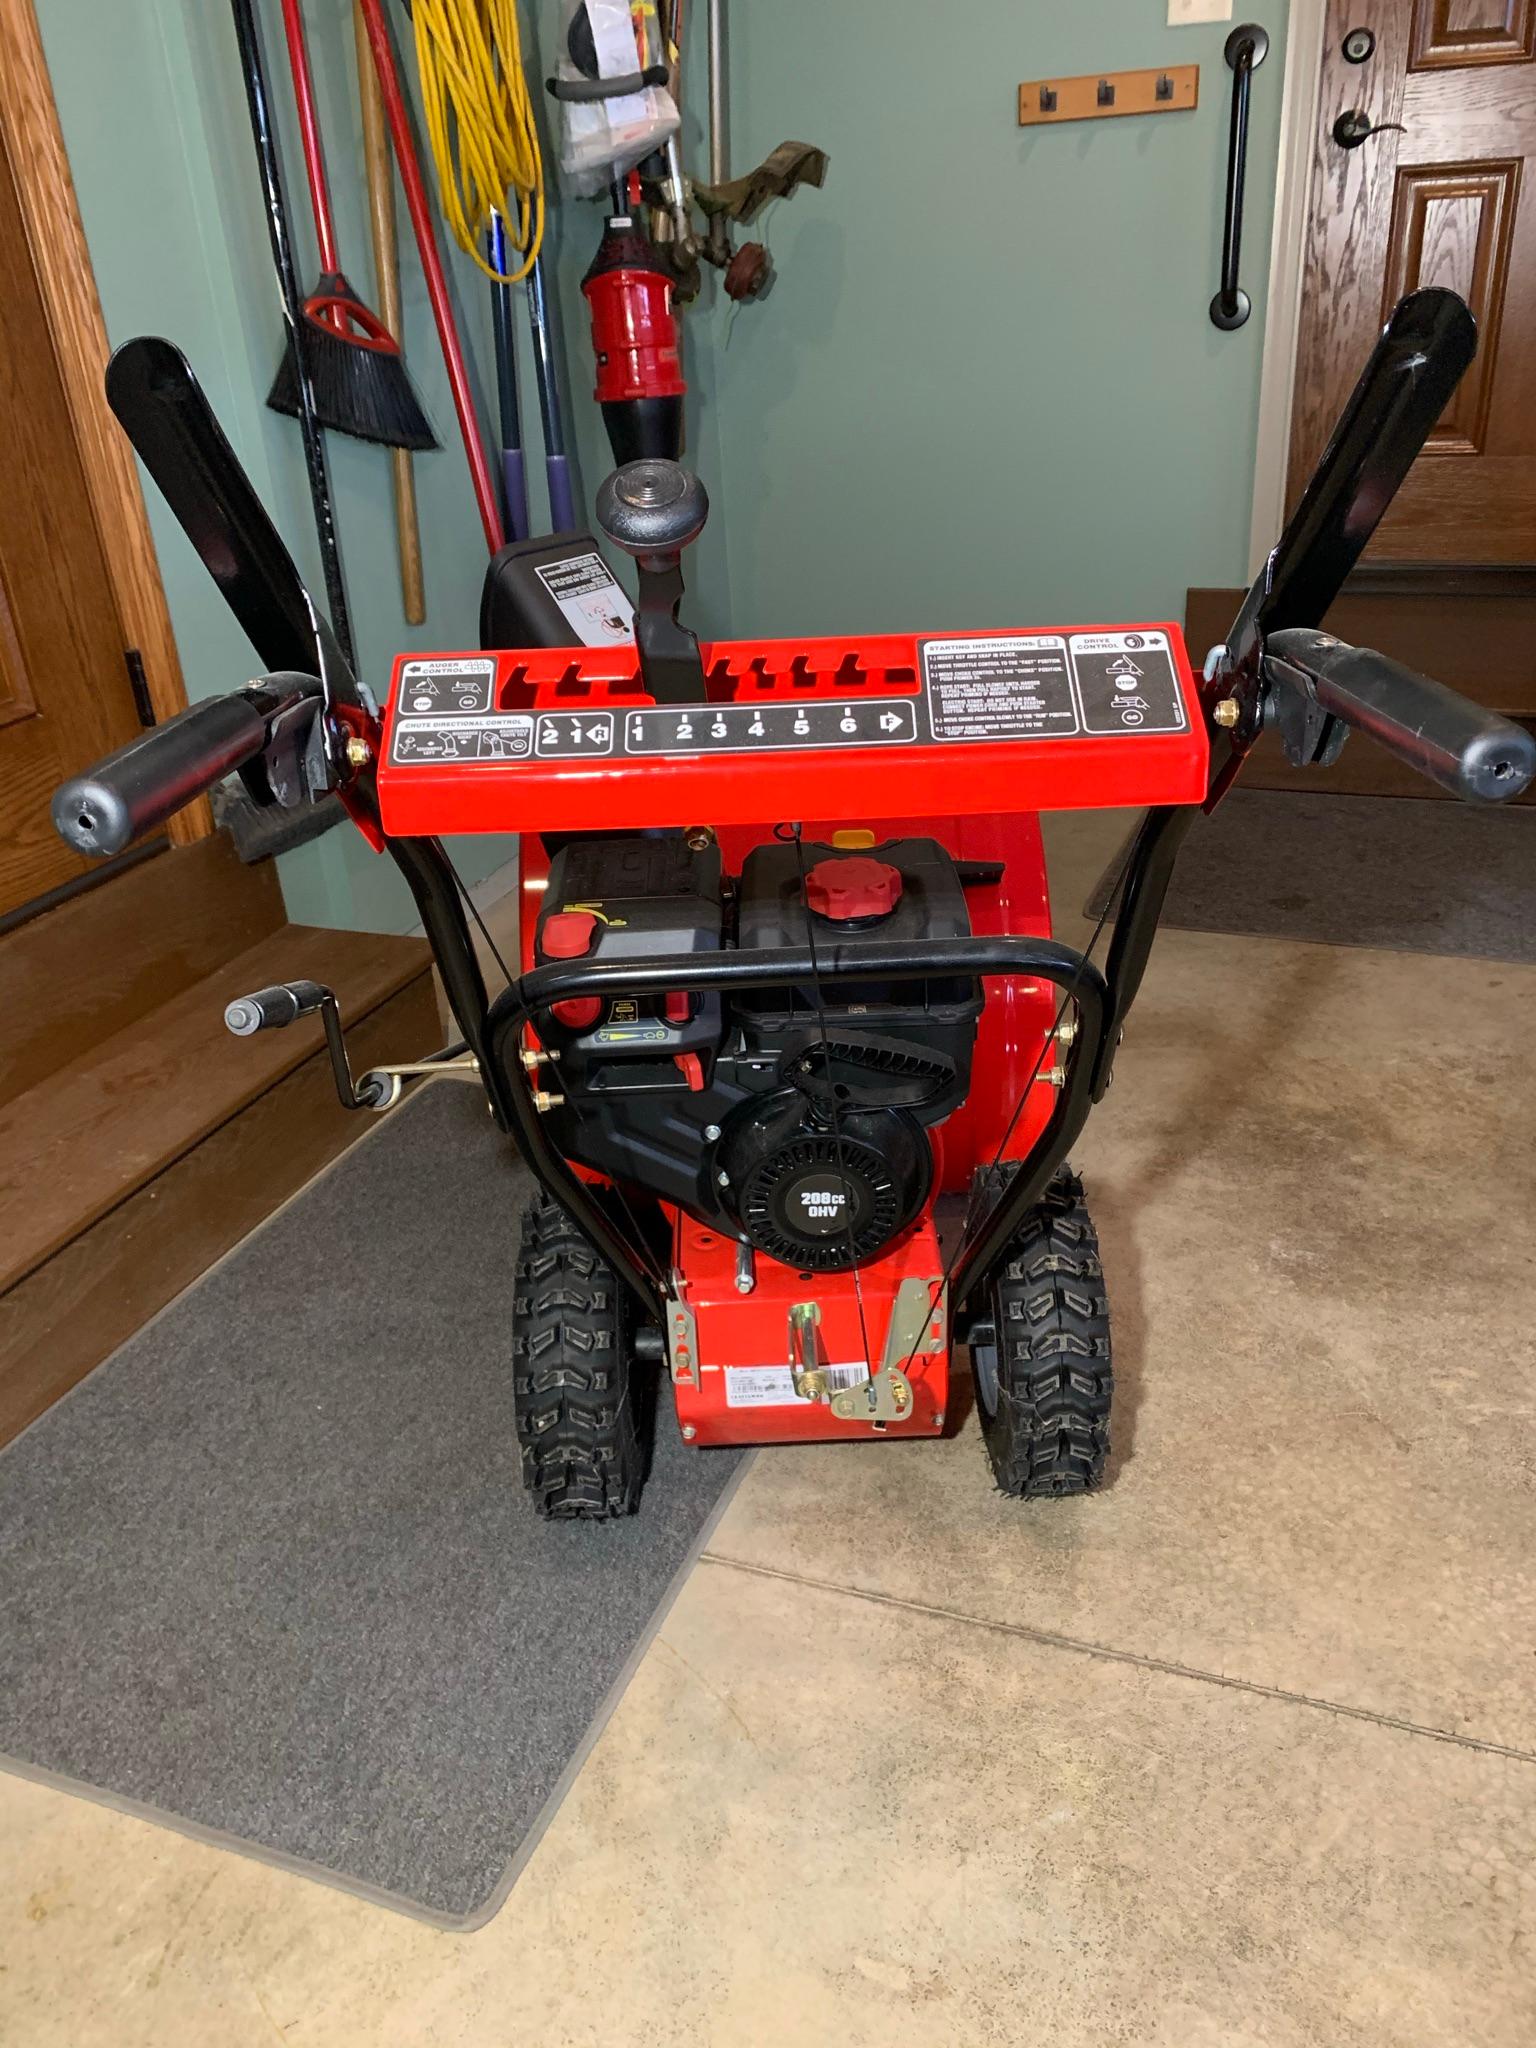 LIKE NEW! Craftsman 24 inch Snow Throwers.  Has key & nibs on tires.